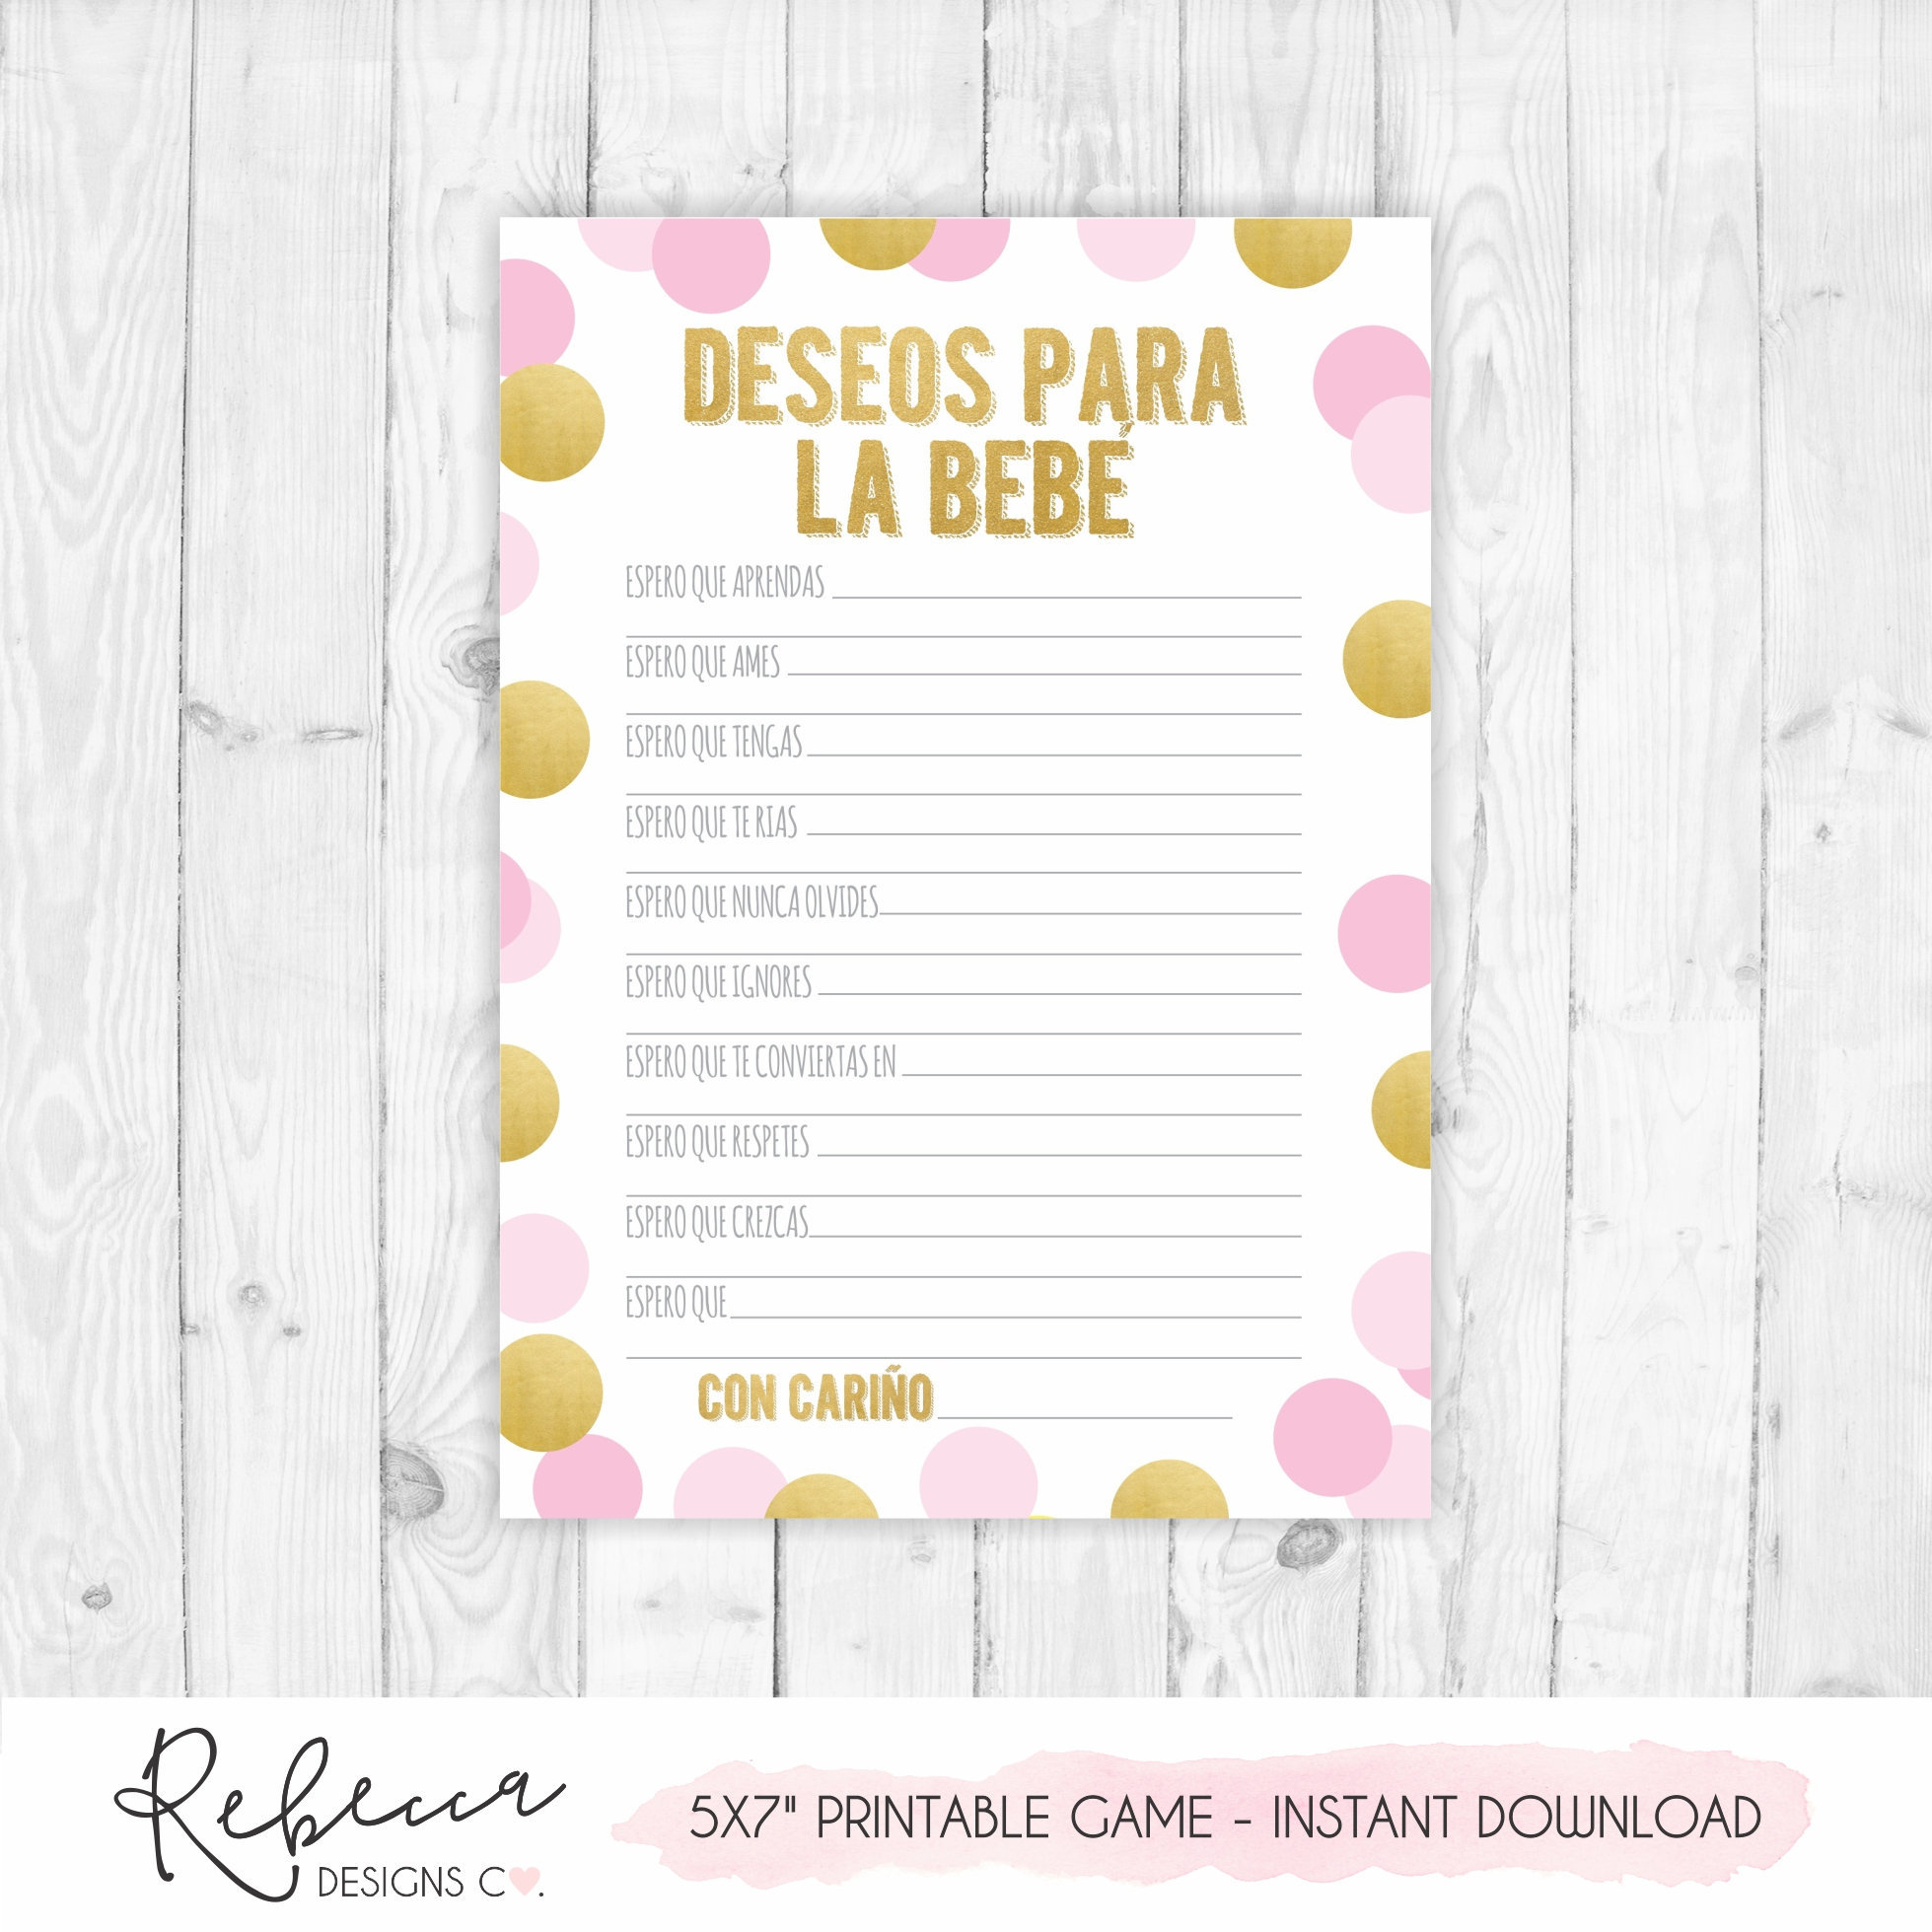 Baby Shower Game In Spanish Wishes For Baby Deseos Para La Bebe within Free Printable Baby Shower Games In Spanish